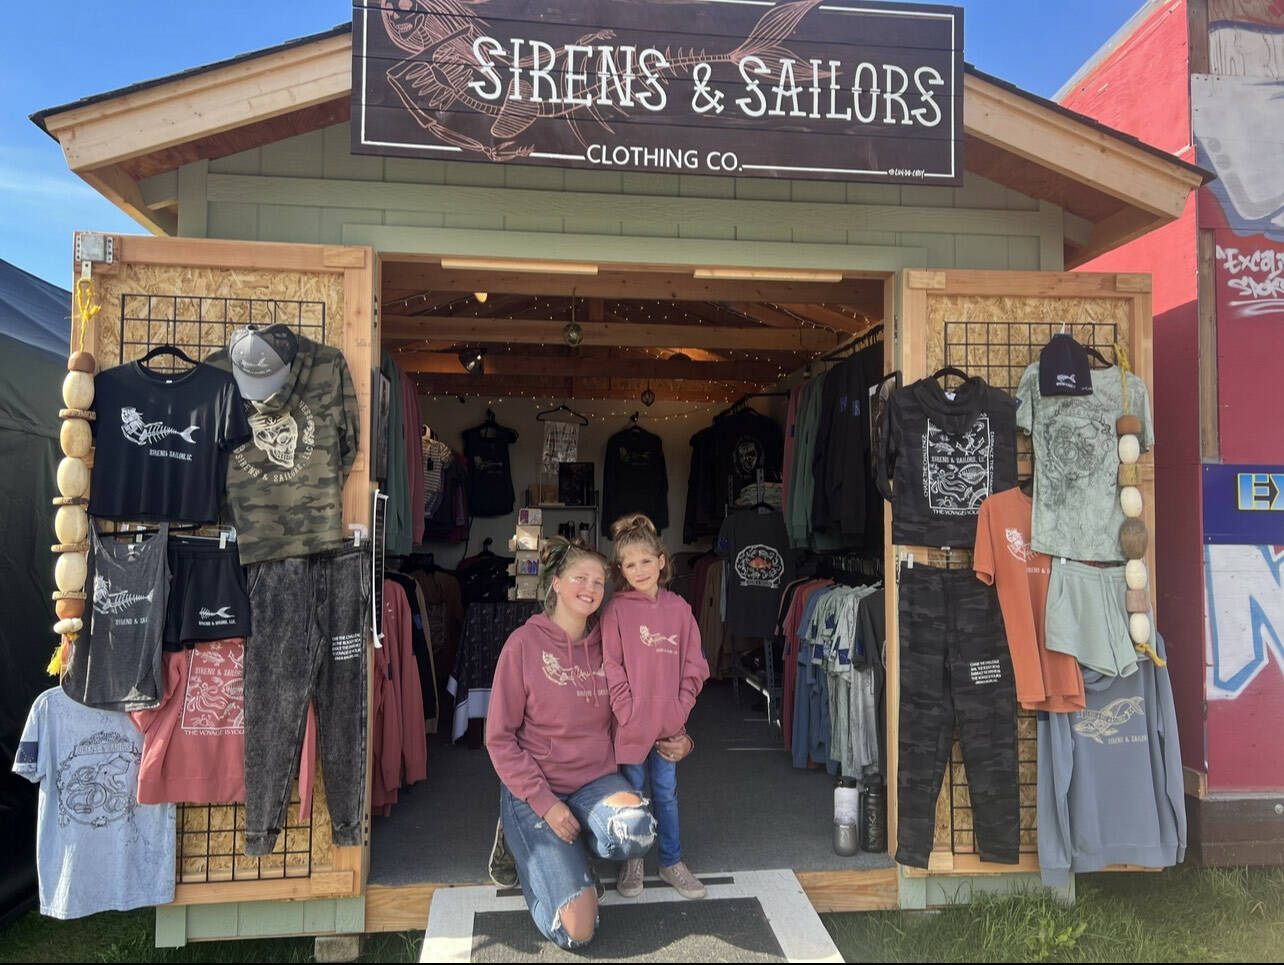 Sirens & Sailors employee Emily Jensen and her daughter Josalee wear matching Sirens & Sailors hoodies at the Sirens & Sailors booth at the 2022 Alaska State Fair in Palmer, Alaska. Photo provided by Jacqueline Burke